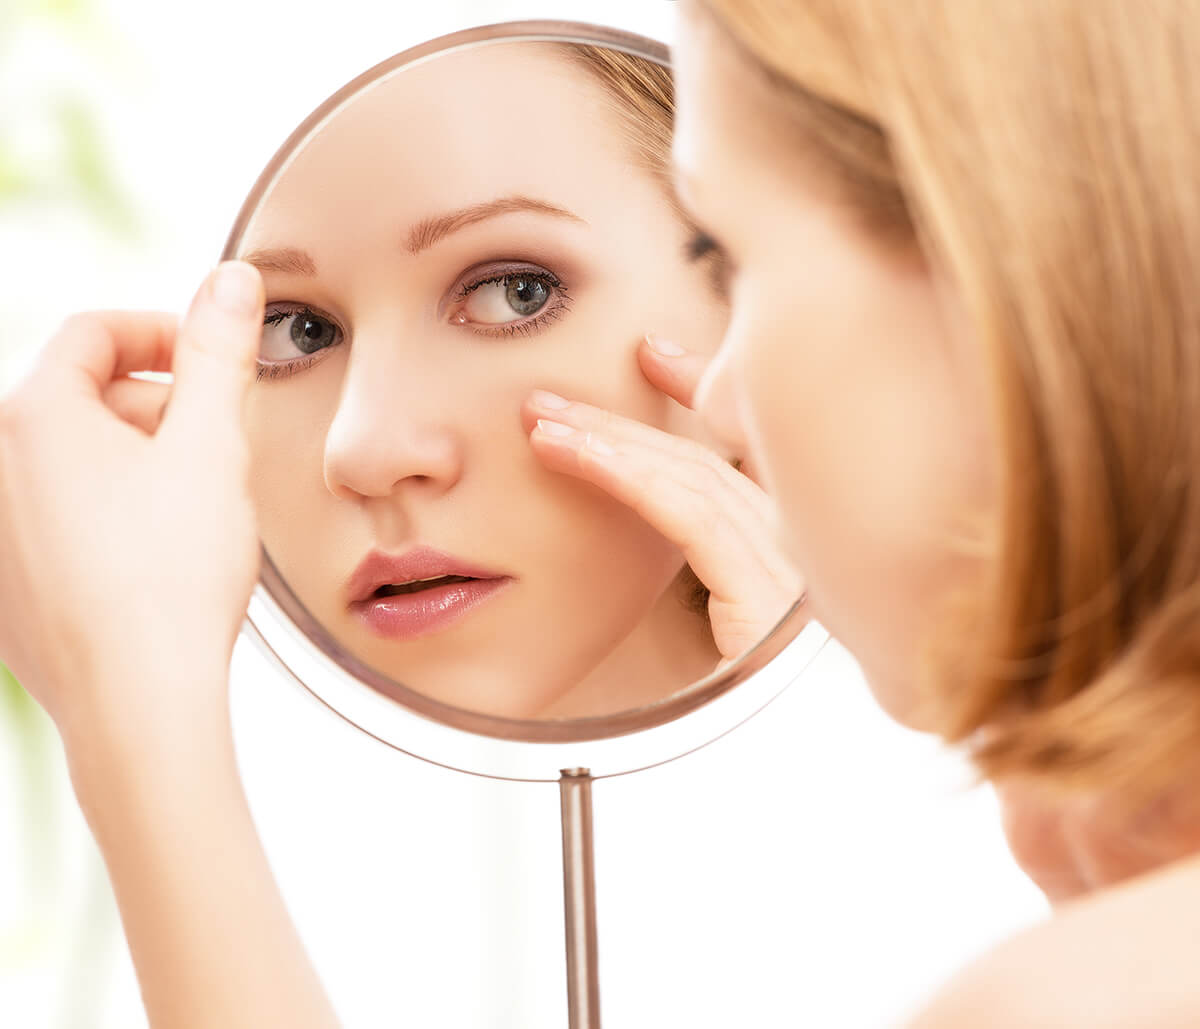 Treating Acne Scars While Pregnant in Washington Area